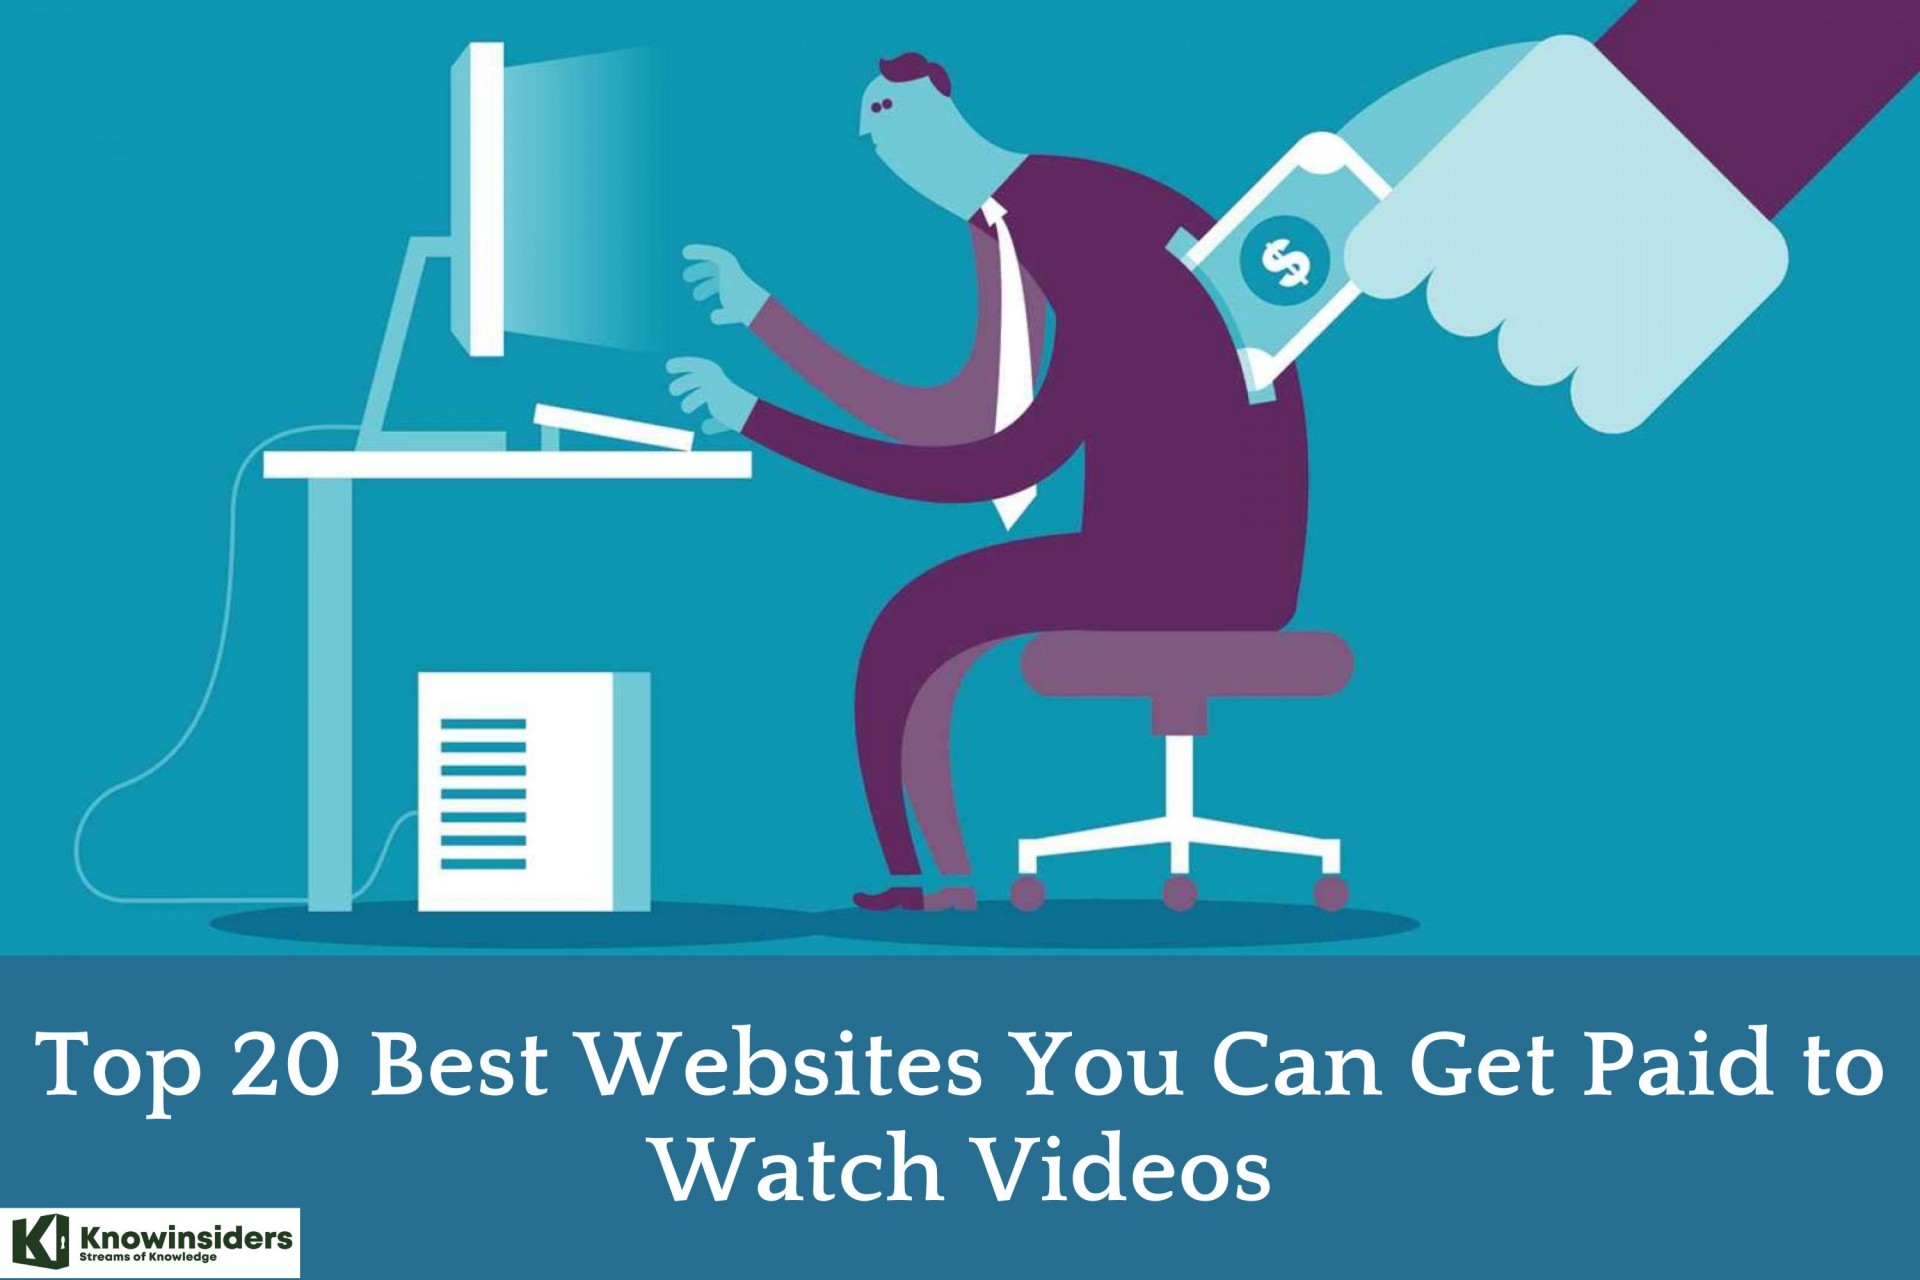 Top 20 Best Websites You Can Get Paid to Watch Videos